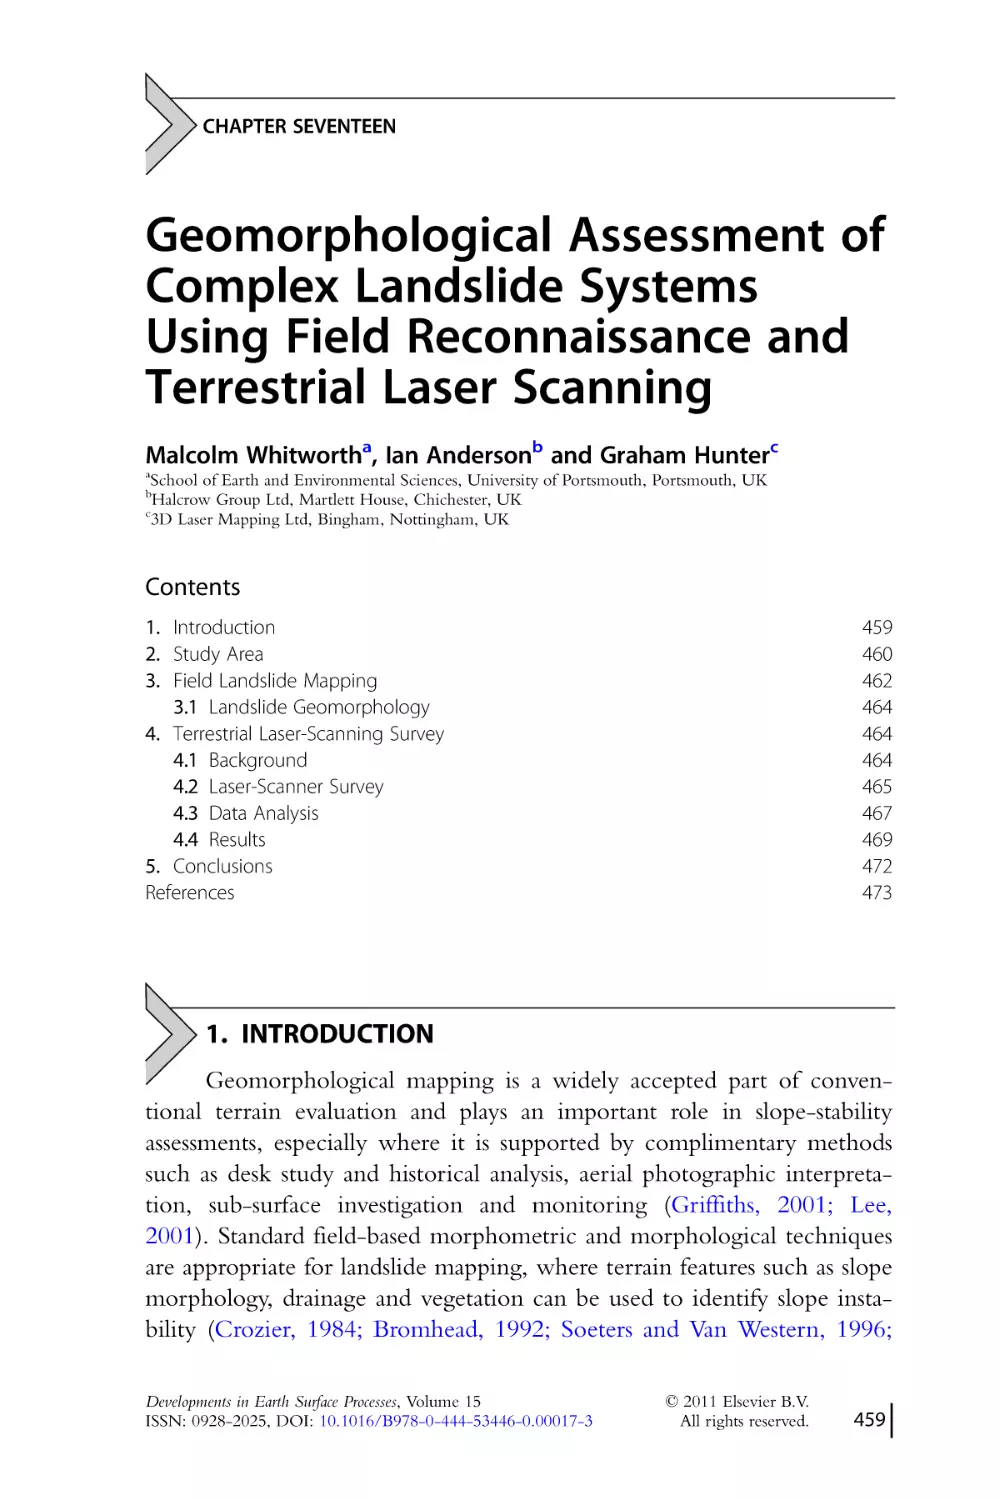 CHAPTER SEVENTEEN.
Geomorphological Assessment of
Complex Landslide Systems
Using Field Reconnaissance and
Terrestrial Laser Scanning
1. Introduction